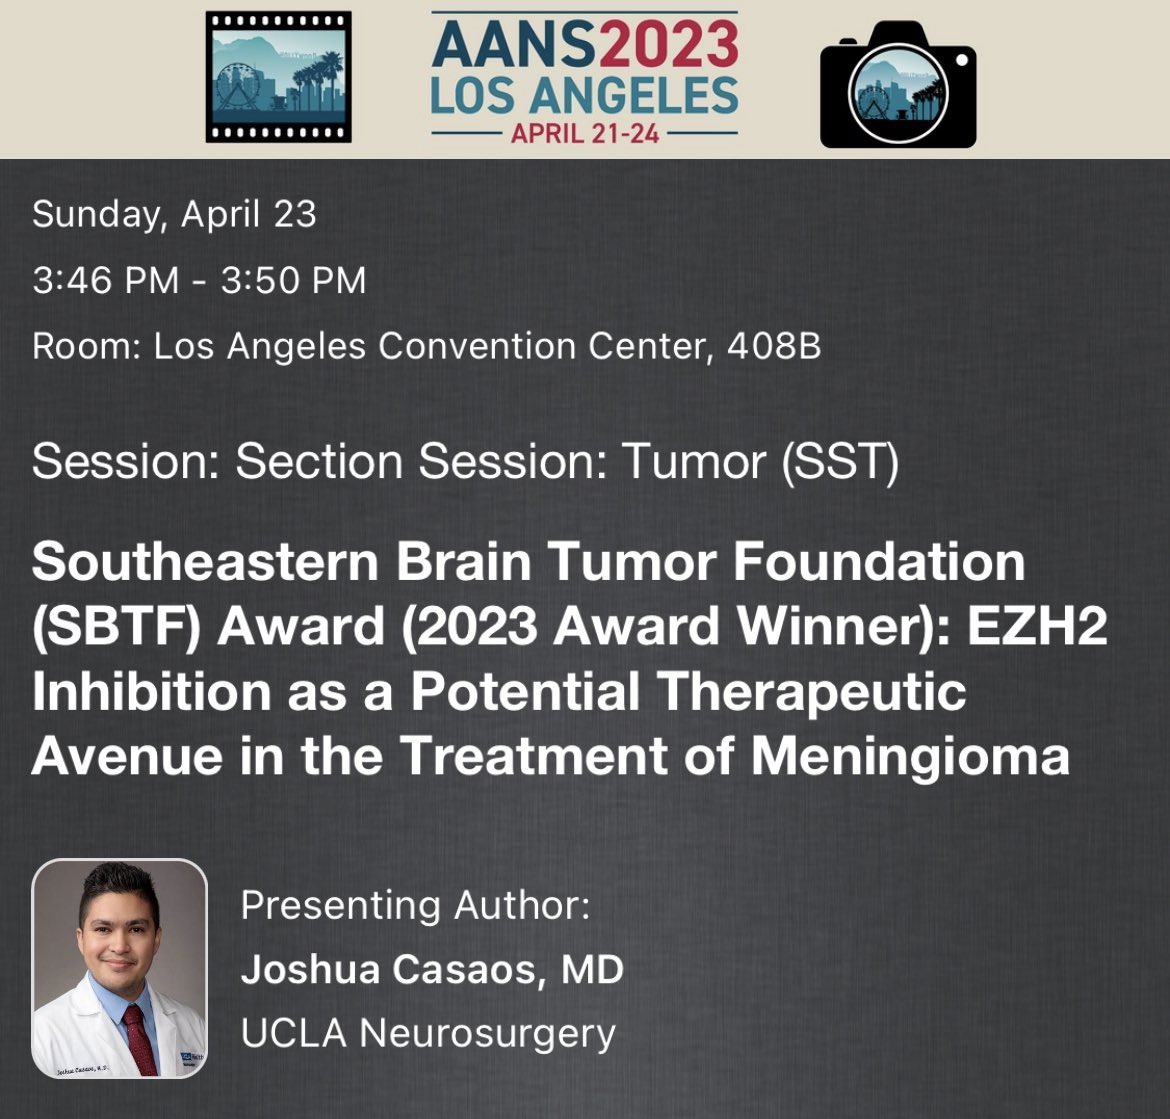 Congratulations to @UCLANsgy resident Dr. Josh Casaos on his outstanding #AANS2023 talk & 2023 @sbtfoundation award winning work on EZH2 inhibition in the treatment of meningioma.